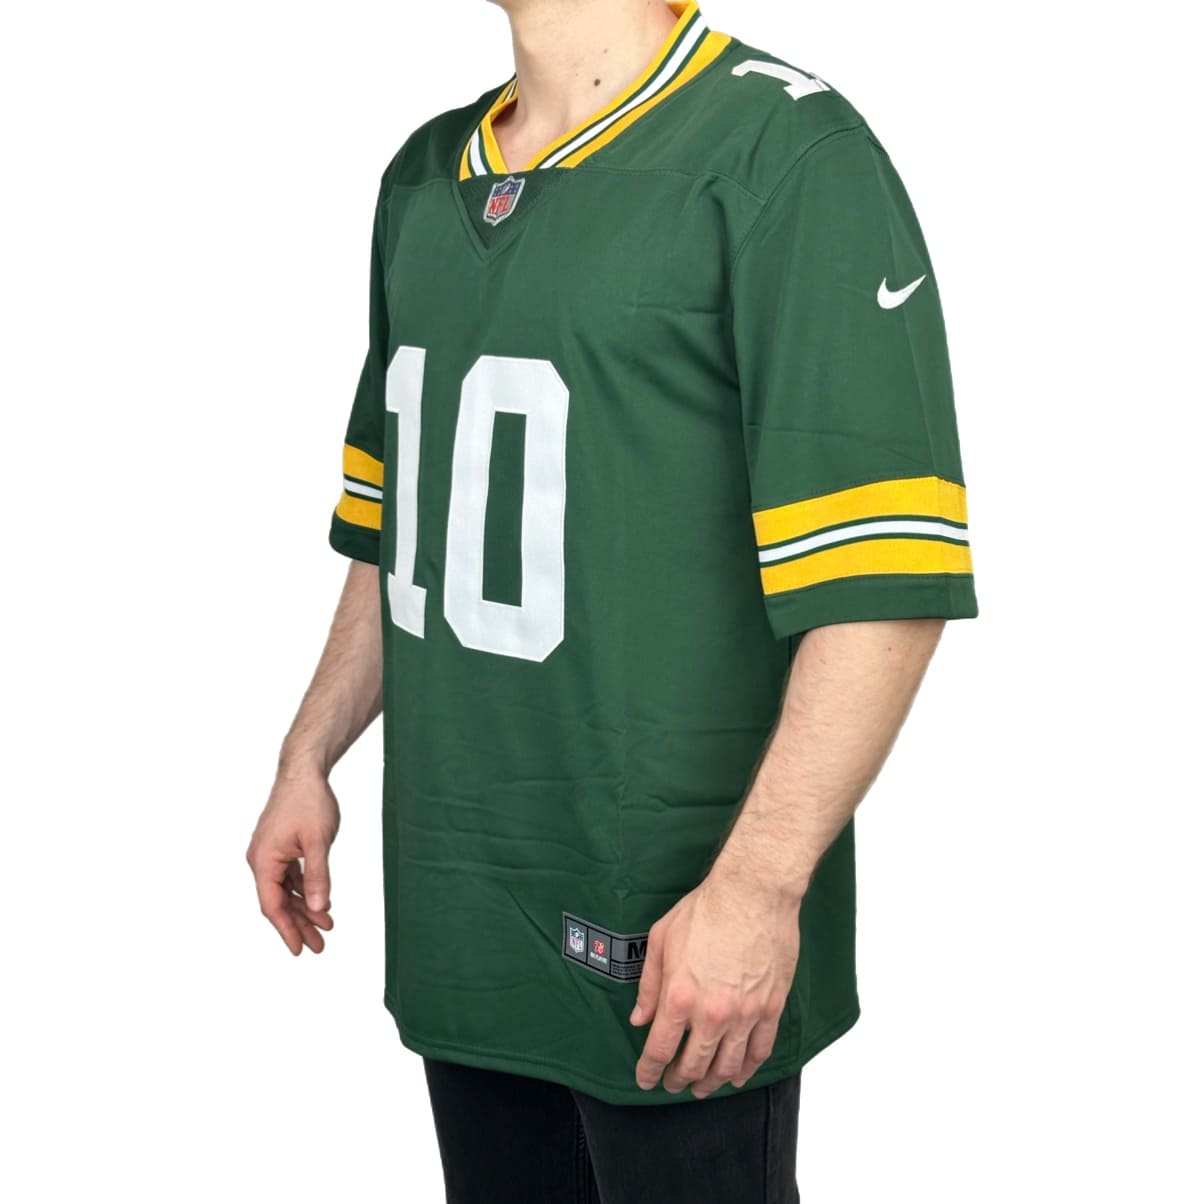 JERSEY PACKERS LOVE